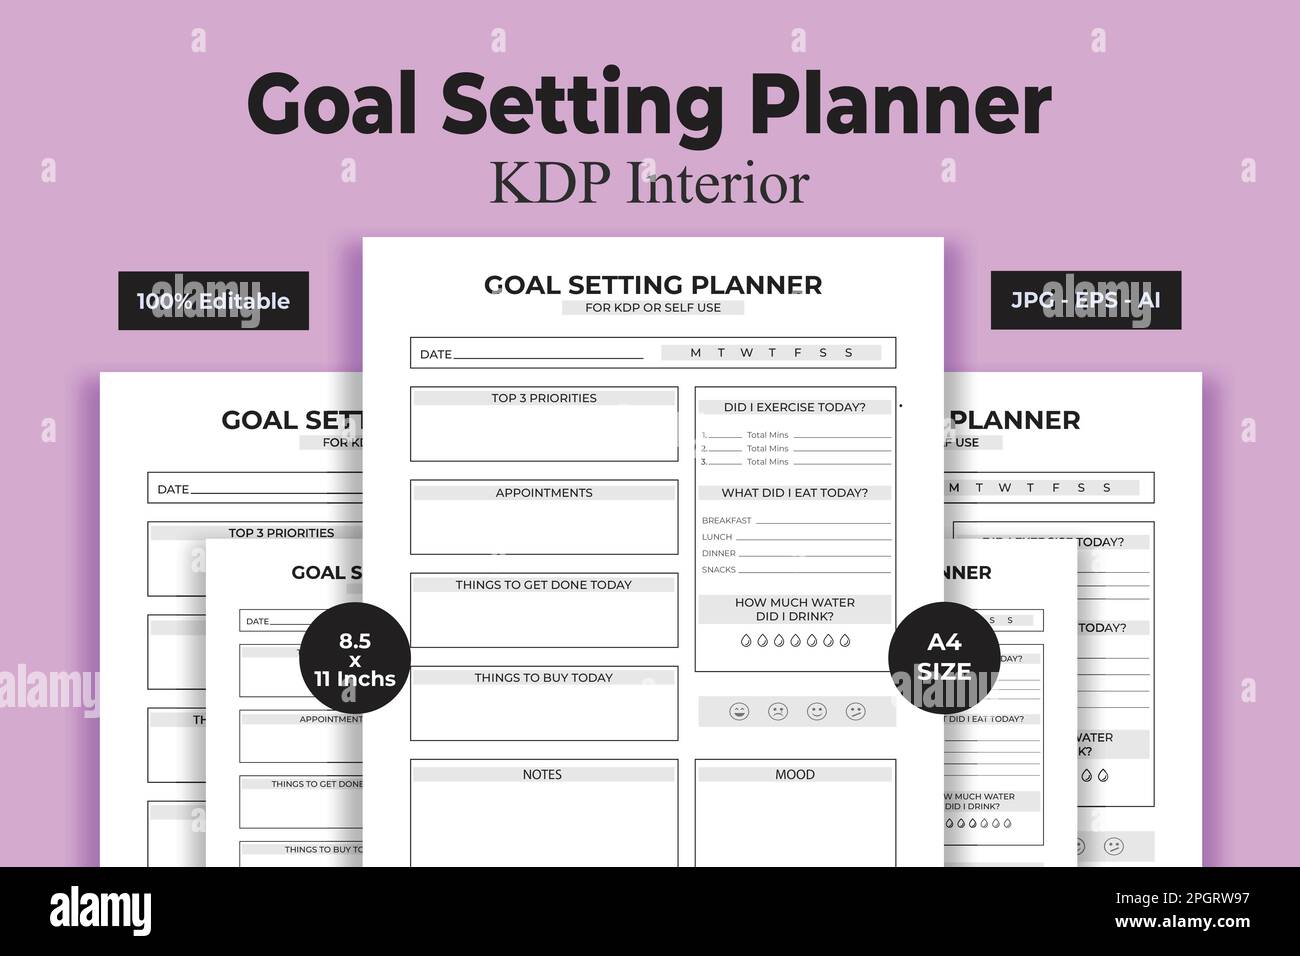 Goal Setting Planner - KDP Interior Low and No Content Book Stock Vector